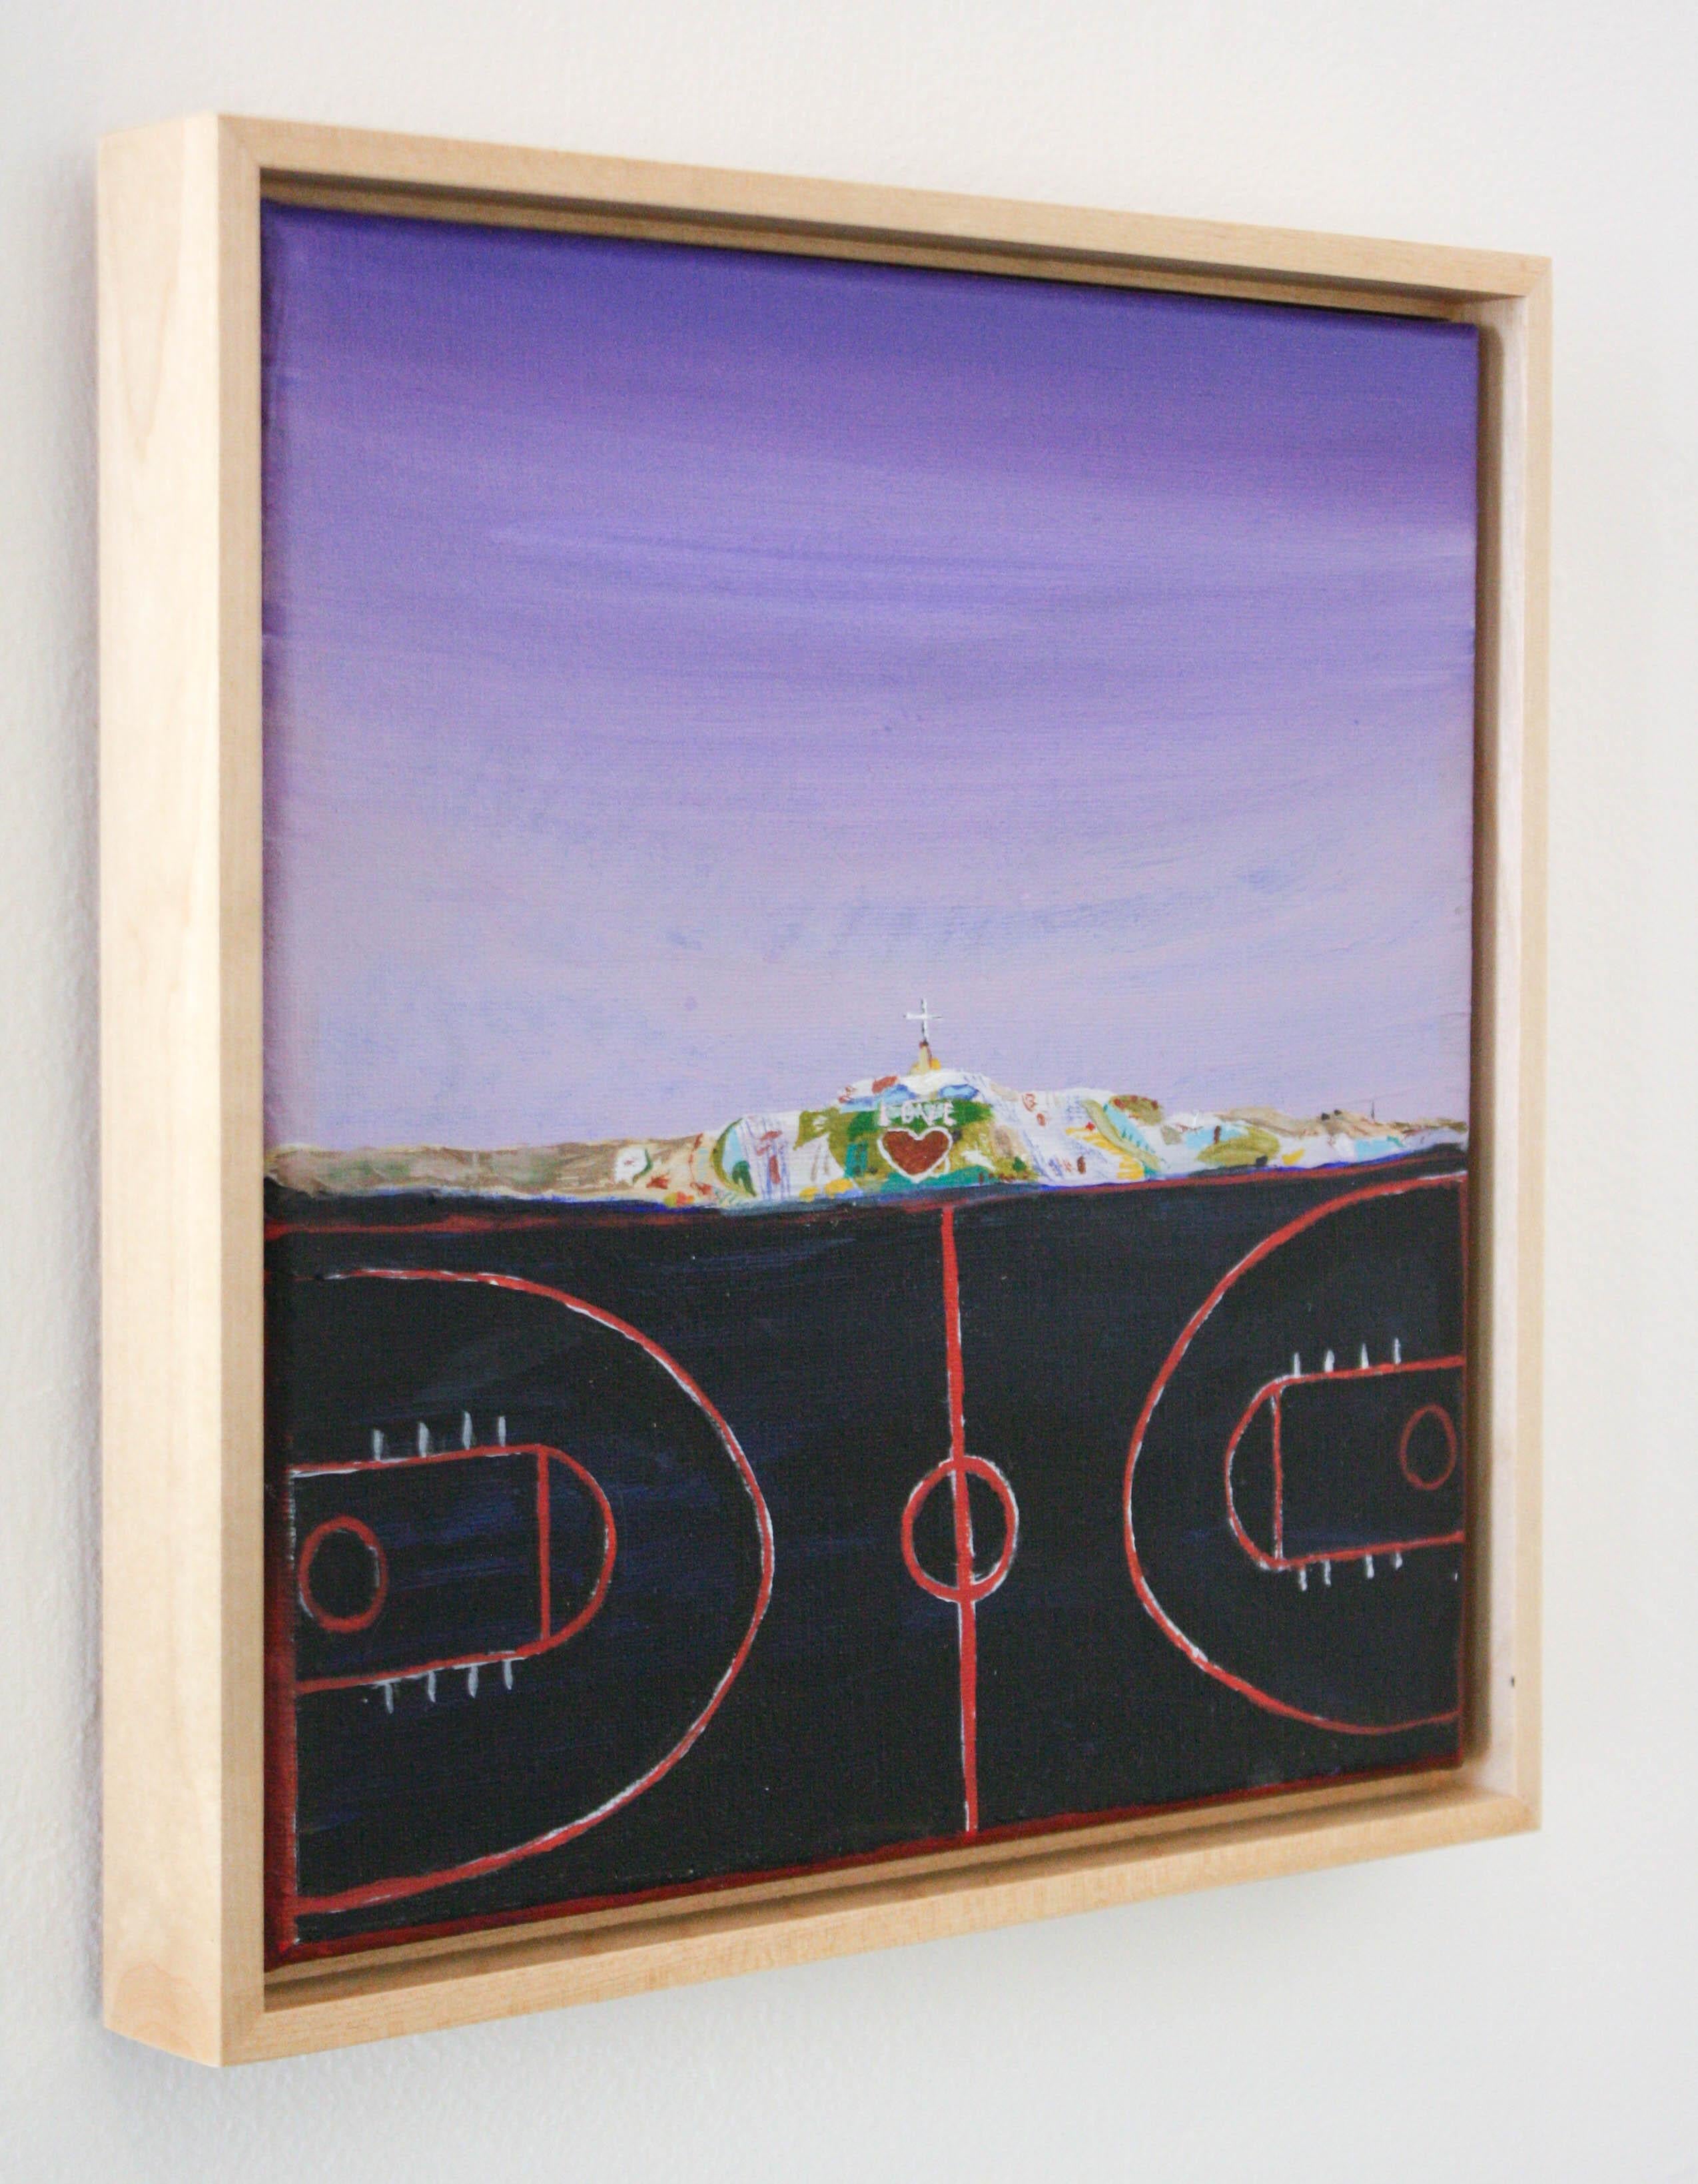 This landscape acrylic painting is a scene of a basketball court at sunset. It utilizes violet, black, red, green, and white. 

John Paul Kesling was born and raised on the banks of the Ohio River, spending much of his time outdoors. He attended